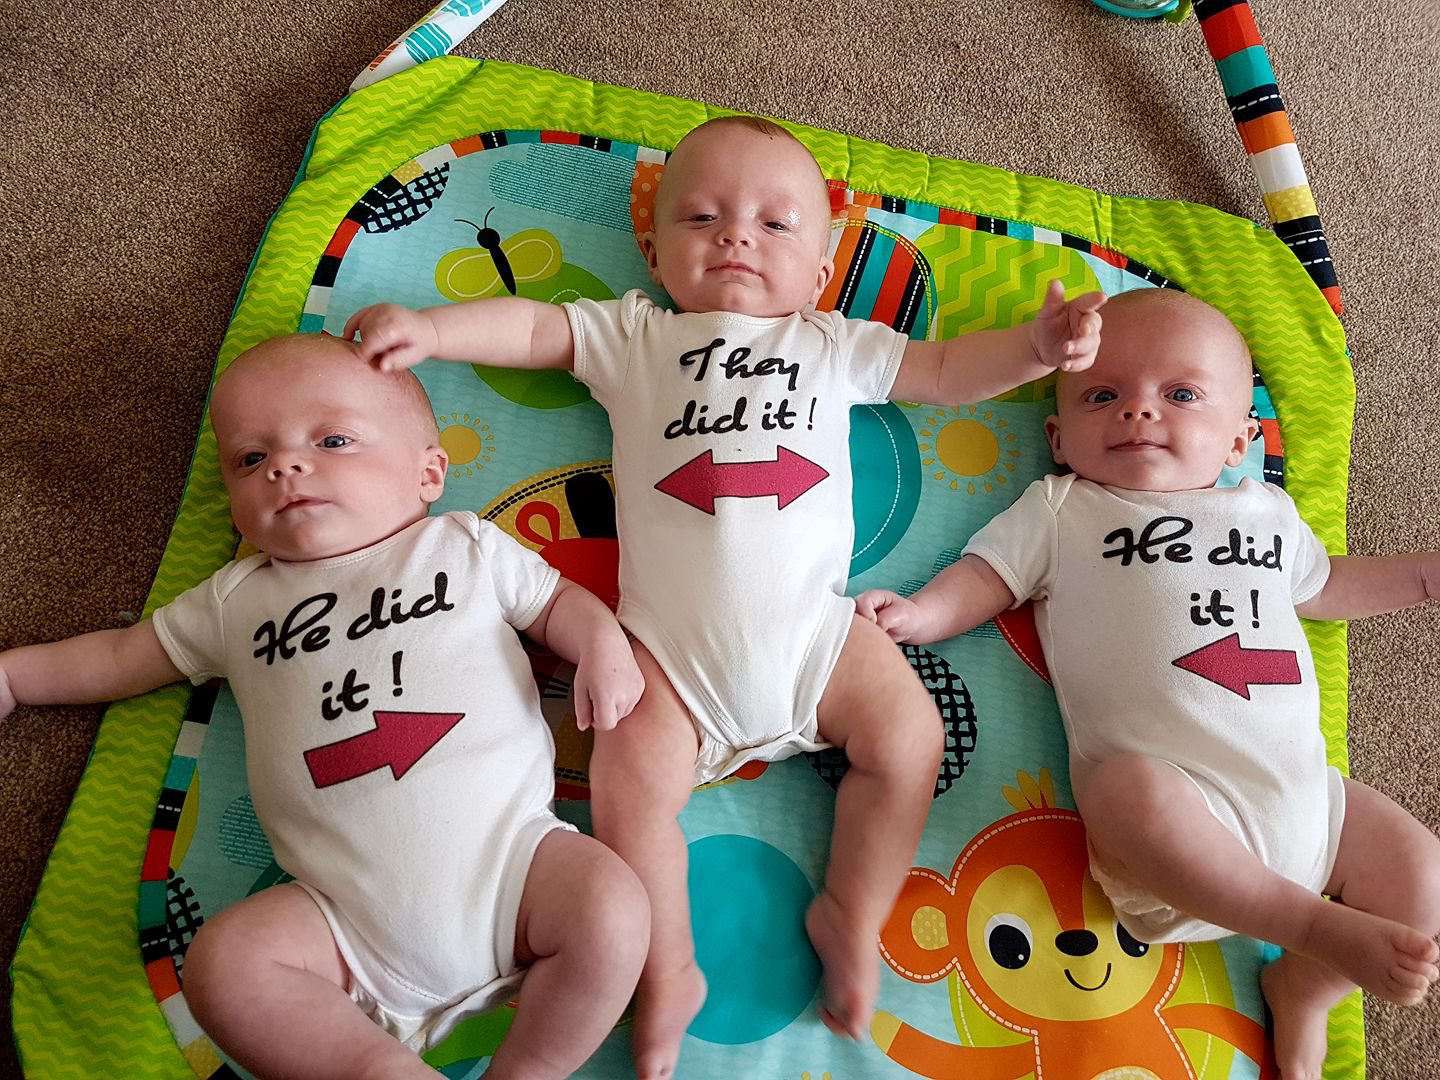 Mother Screamed Babies After Finding Two Triplets Dead